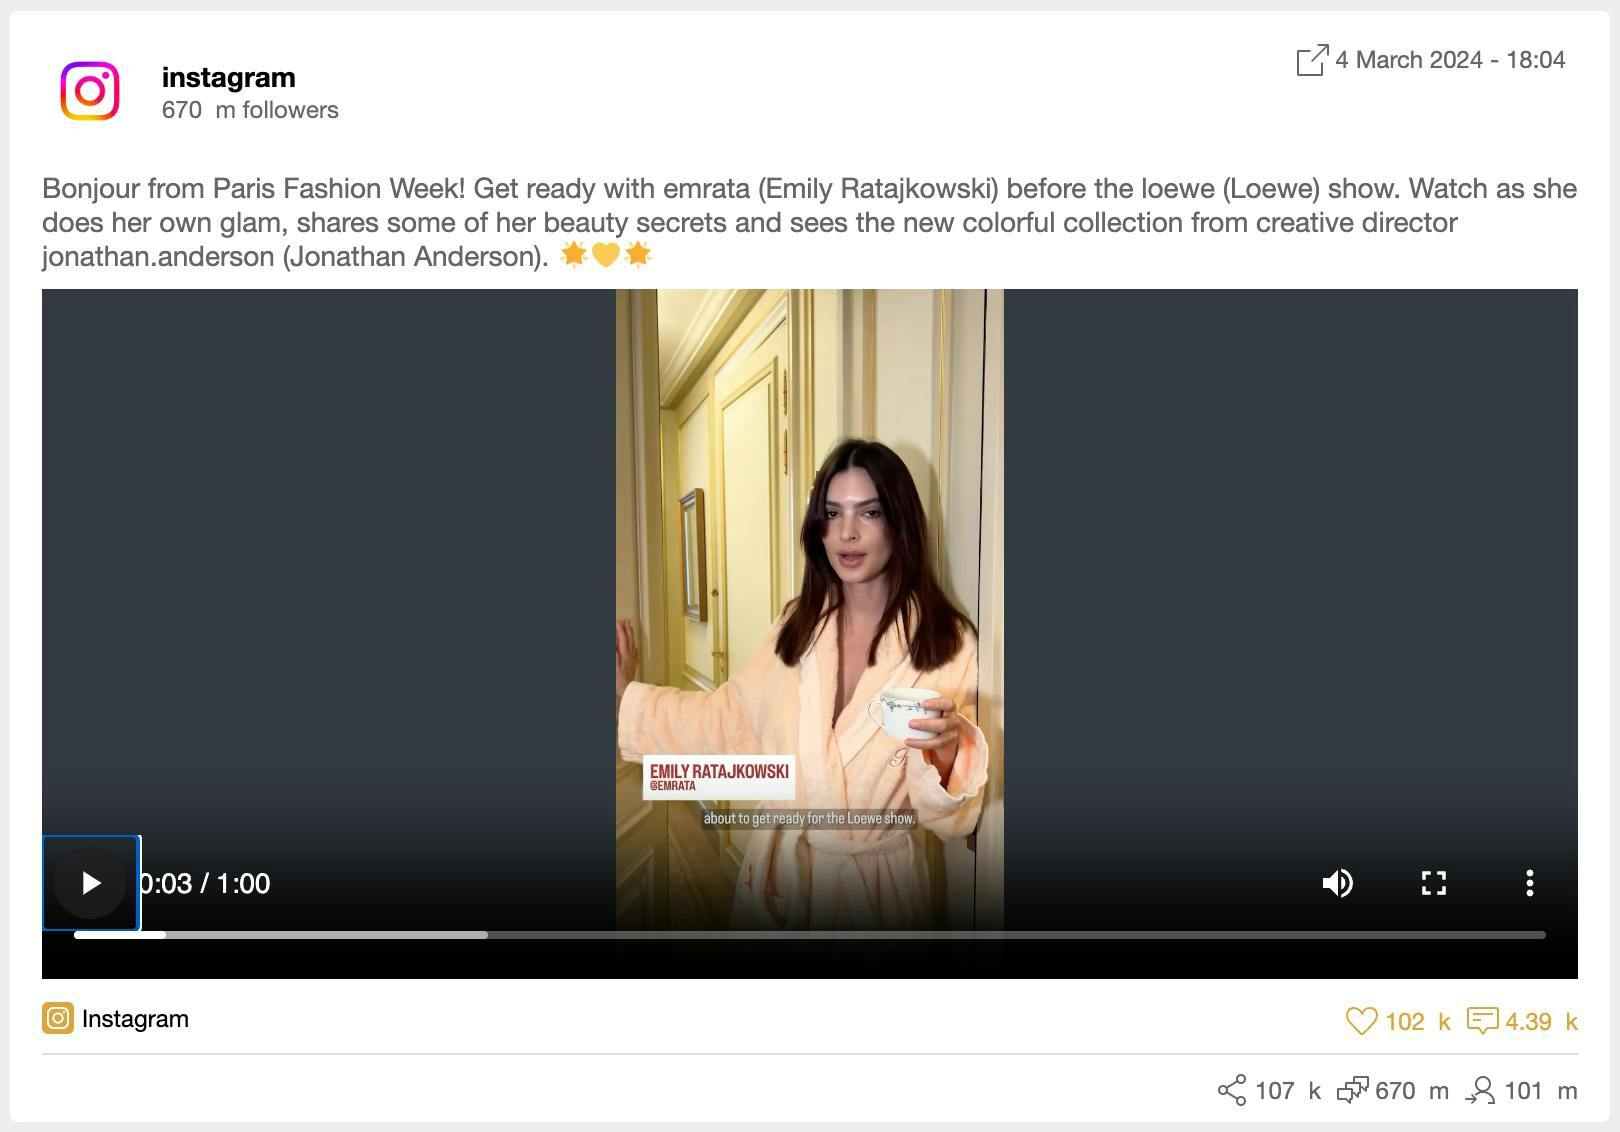 A screenshot of Emily Ratajkowski's Loewe "get ready with me" Instagram post as shown within the Meltwater consumer intelligence platform.